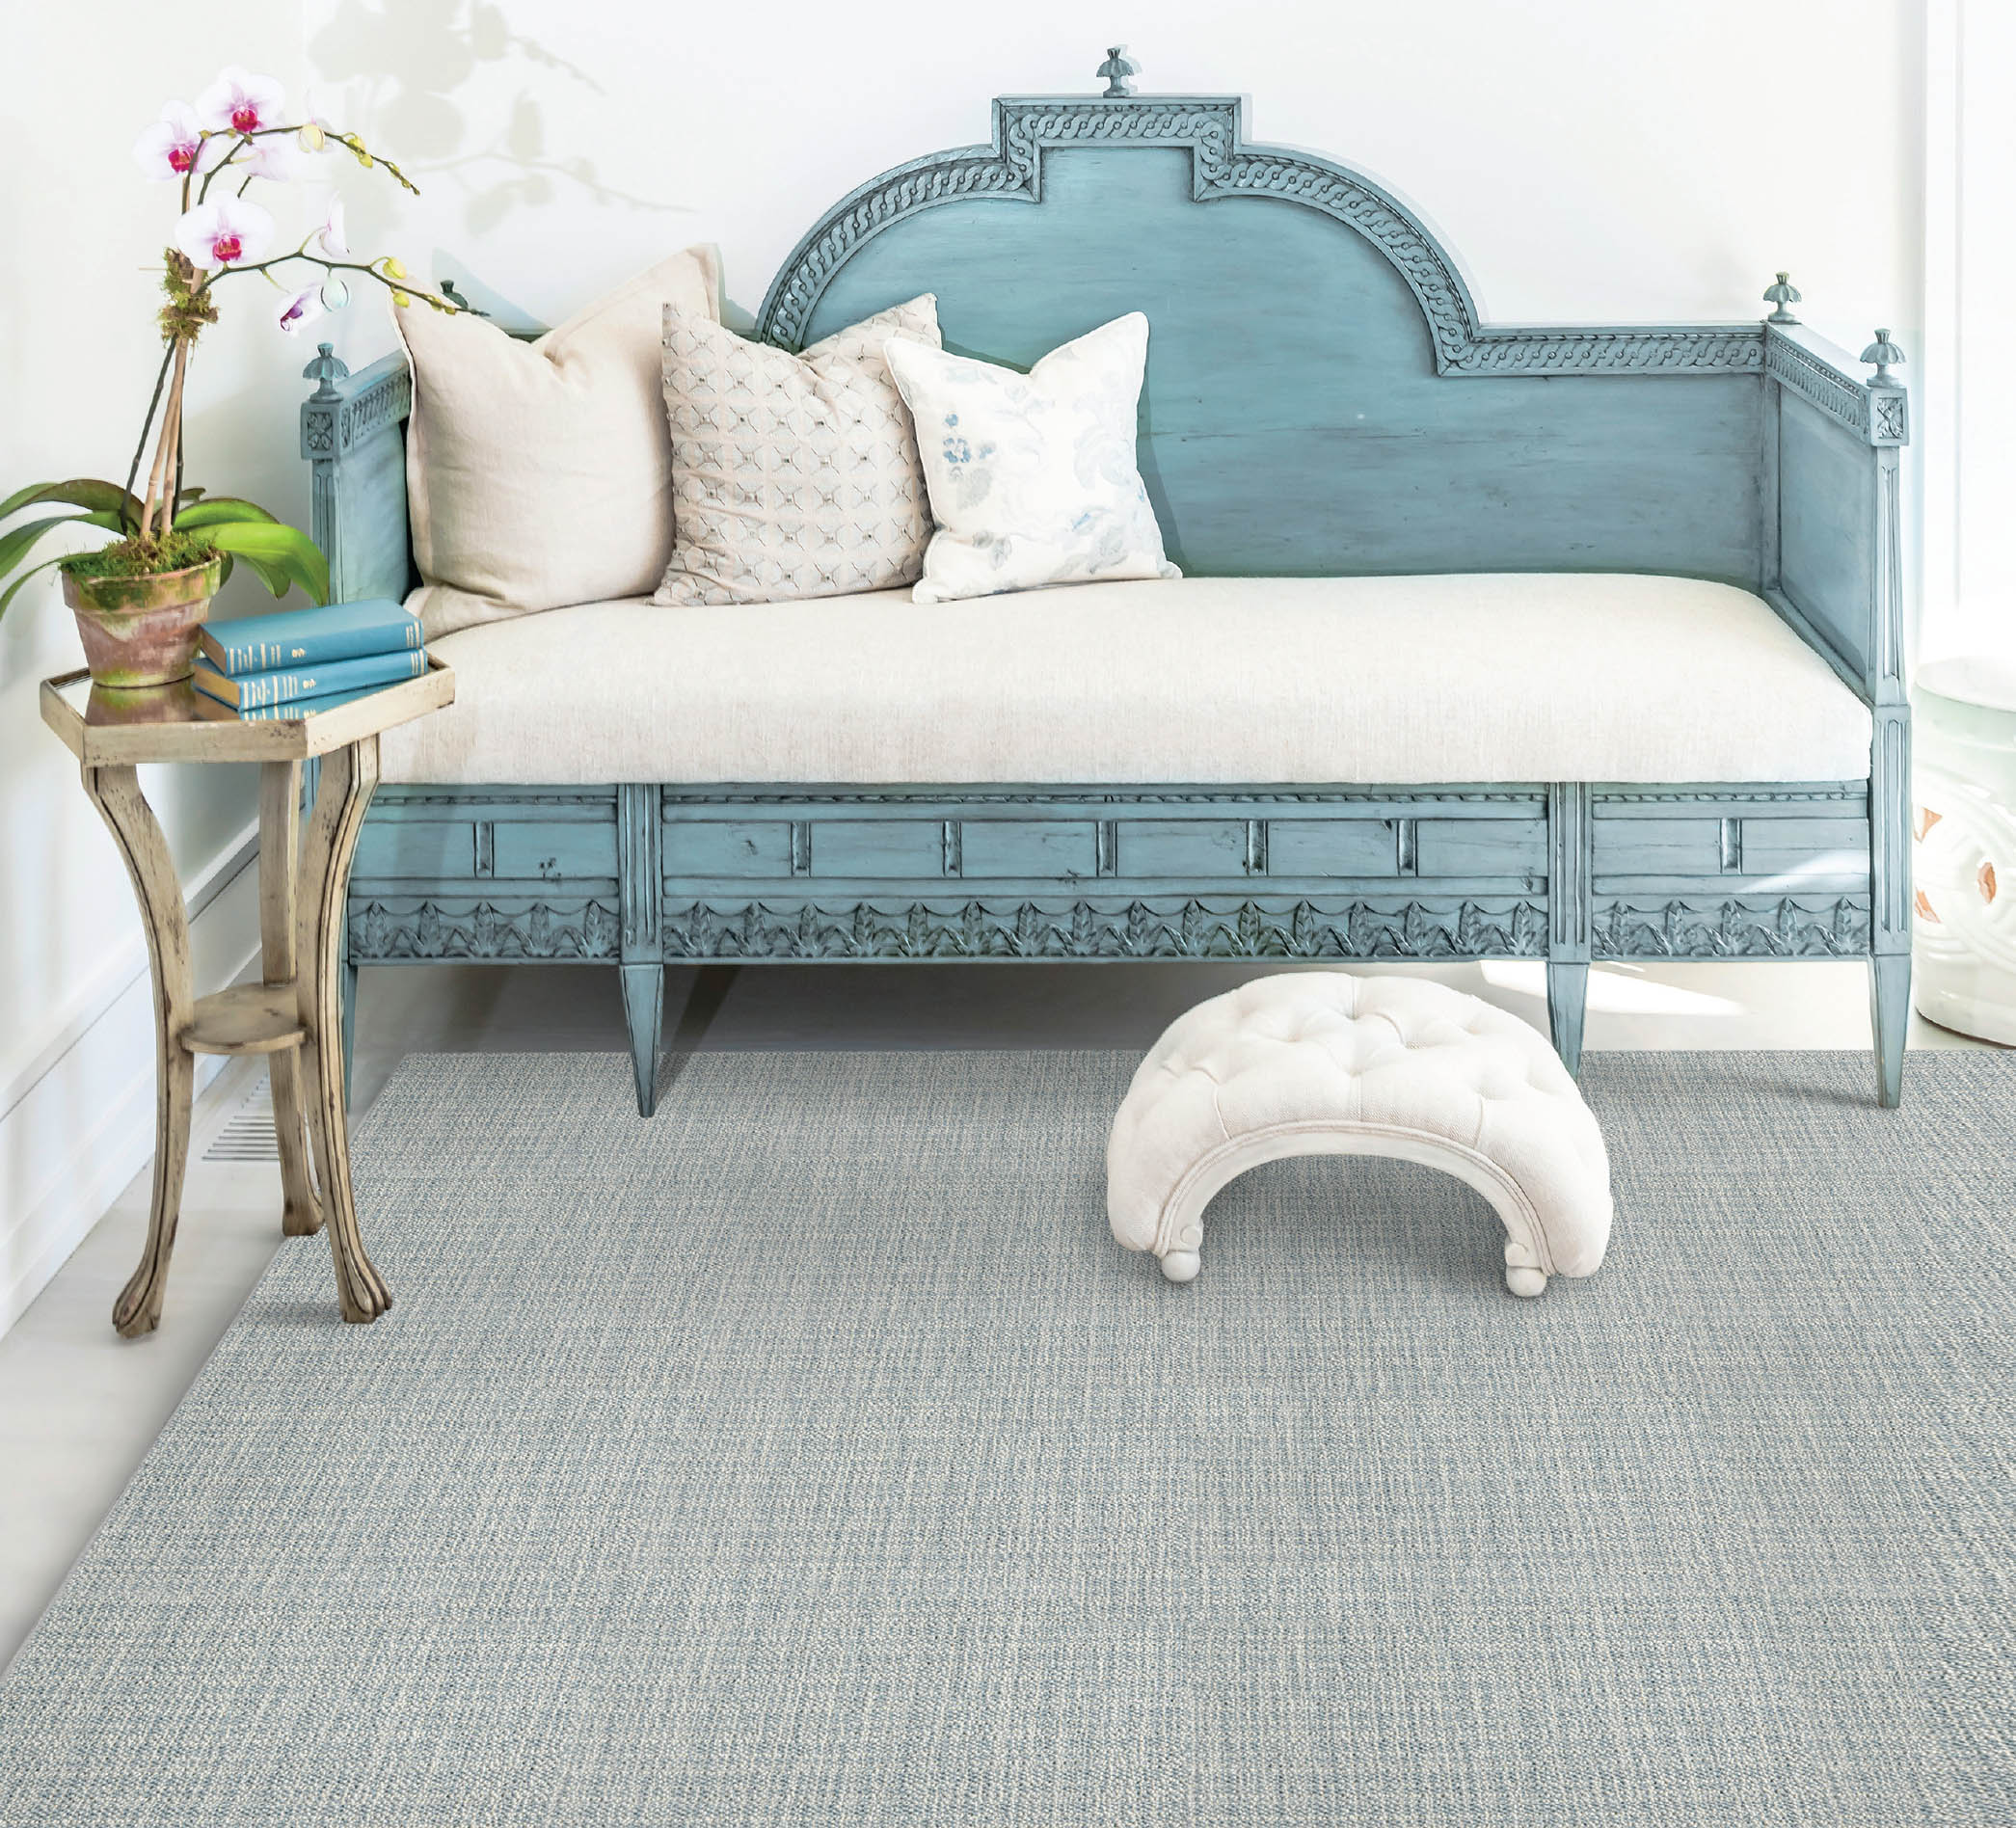 Carpet and Area Rugs Guide | Soft Surface Flooring Guide, Floortex Design